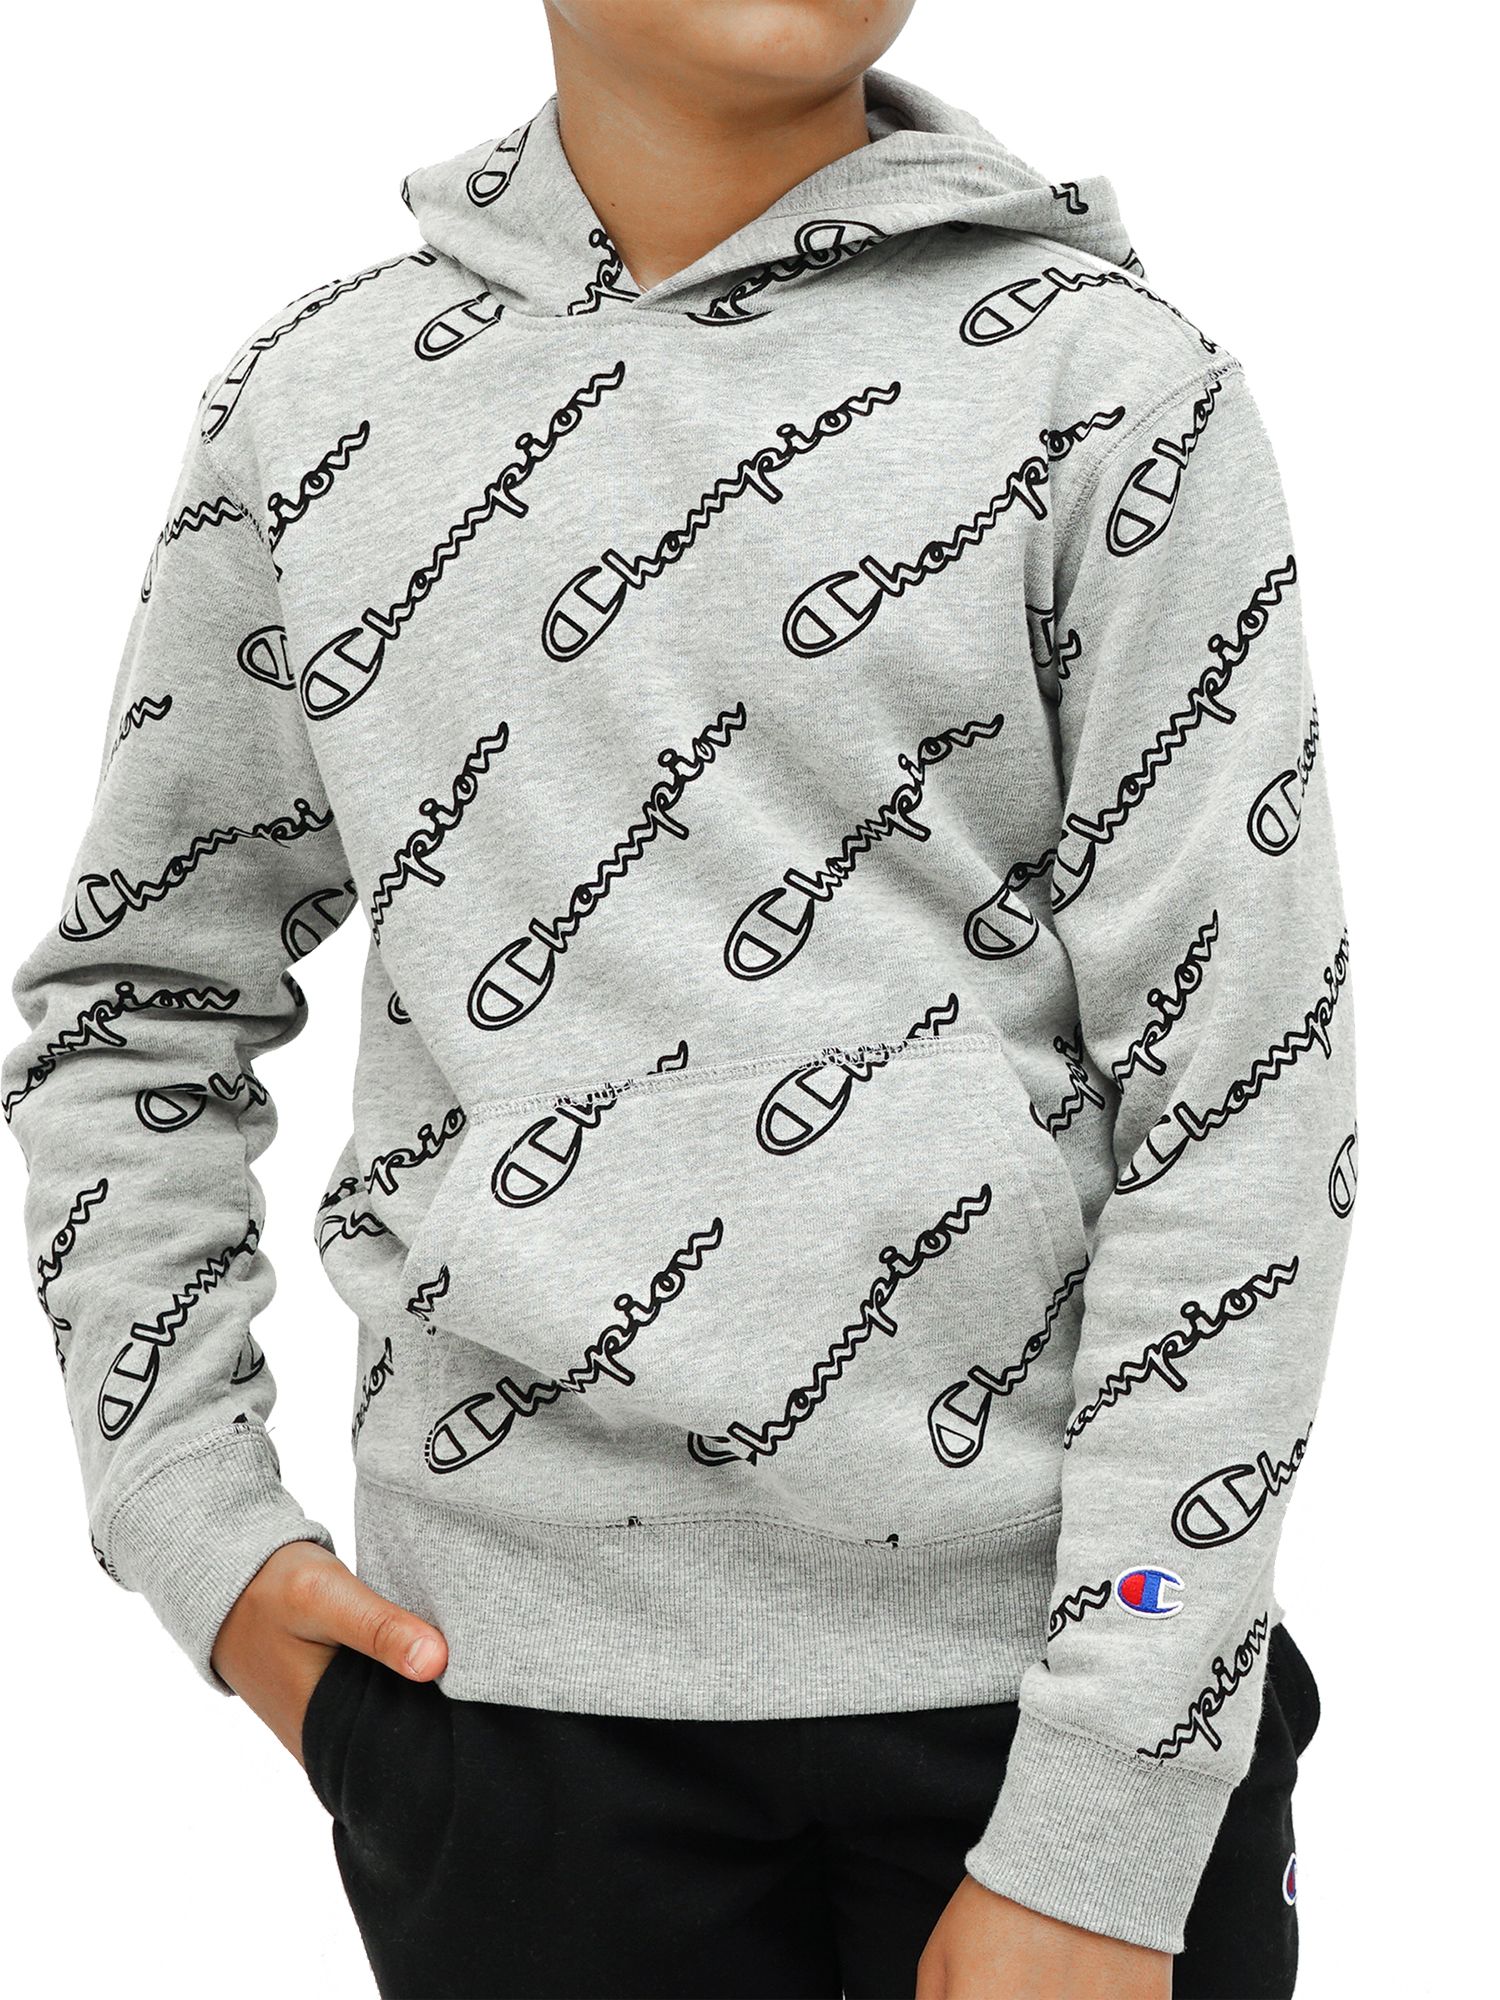 white champion hoodie with champion written all over it